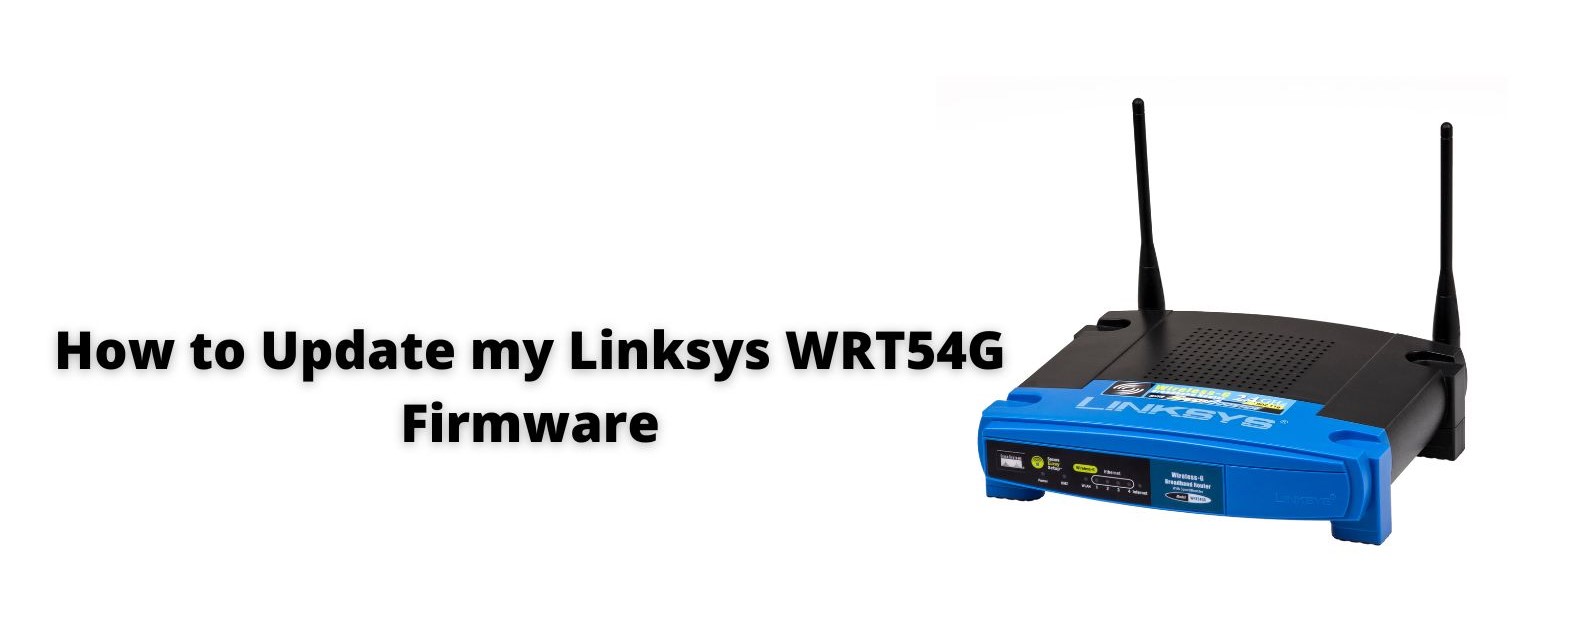 How to Update my Linksys WRT54G Firmware